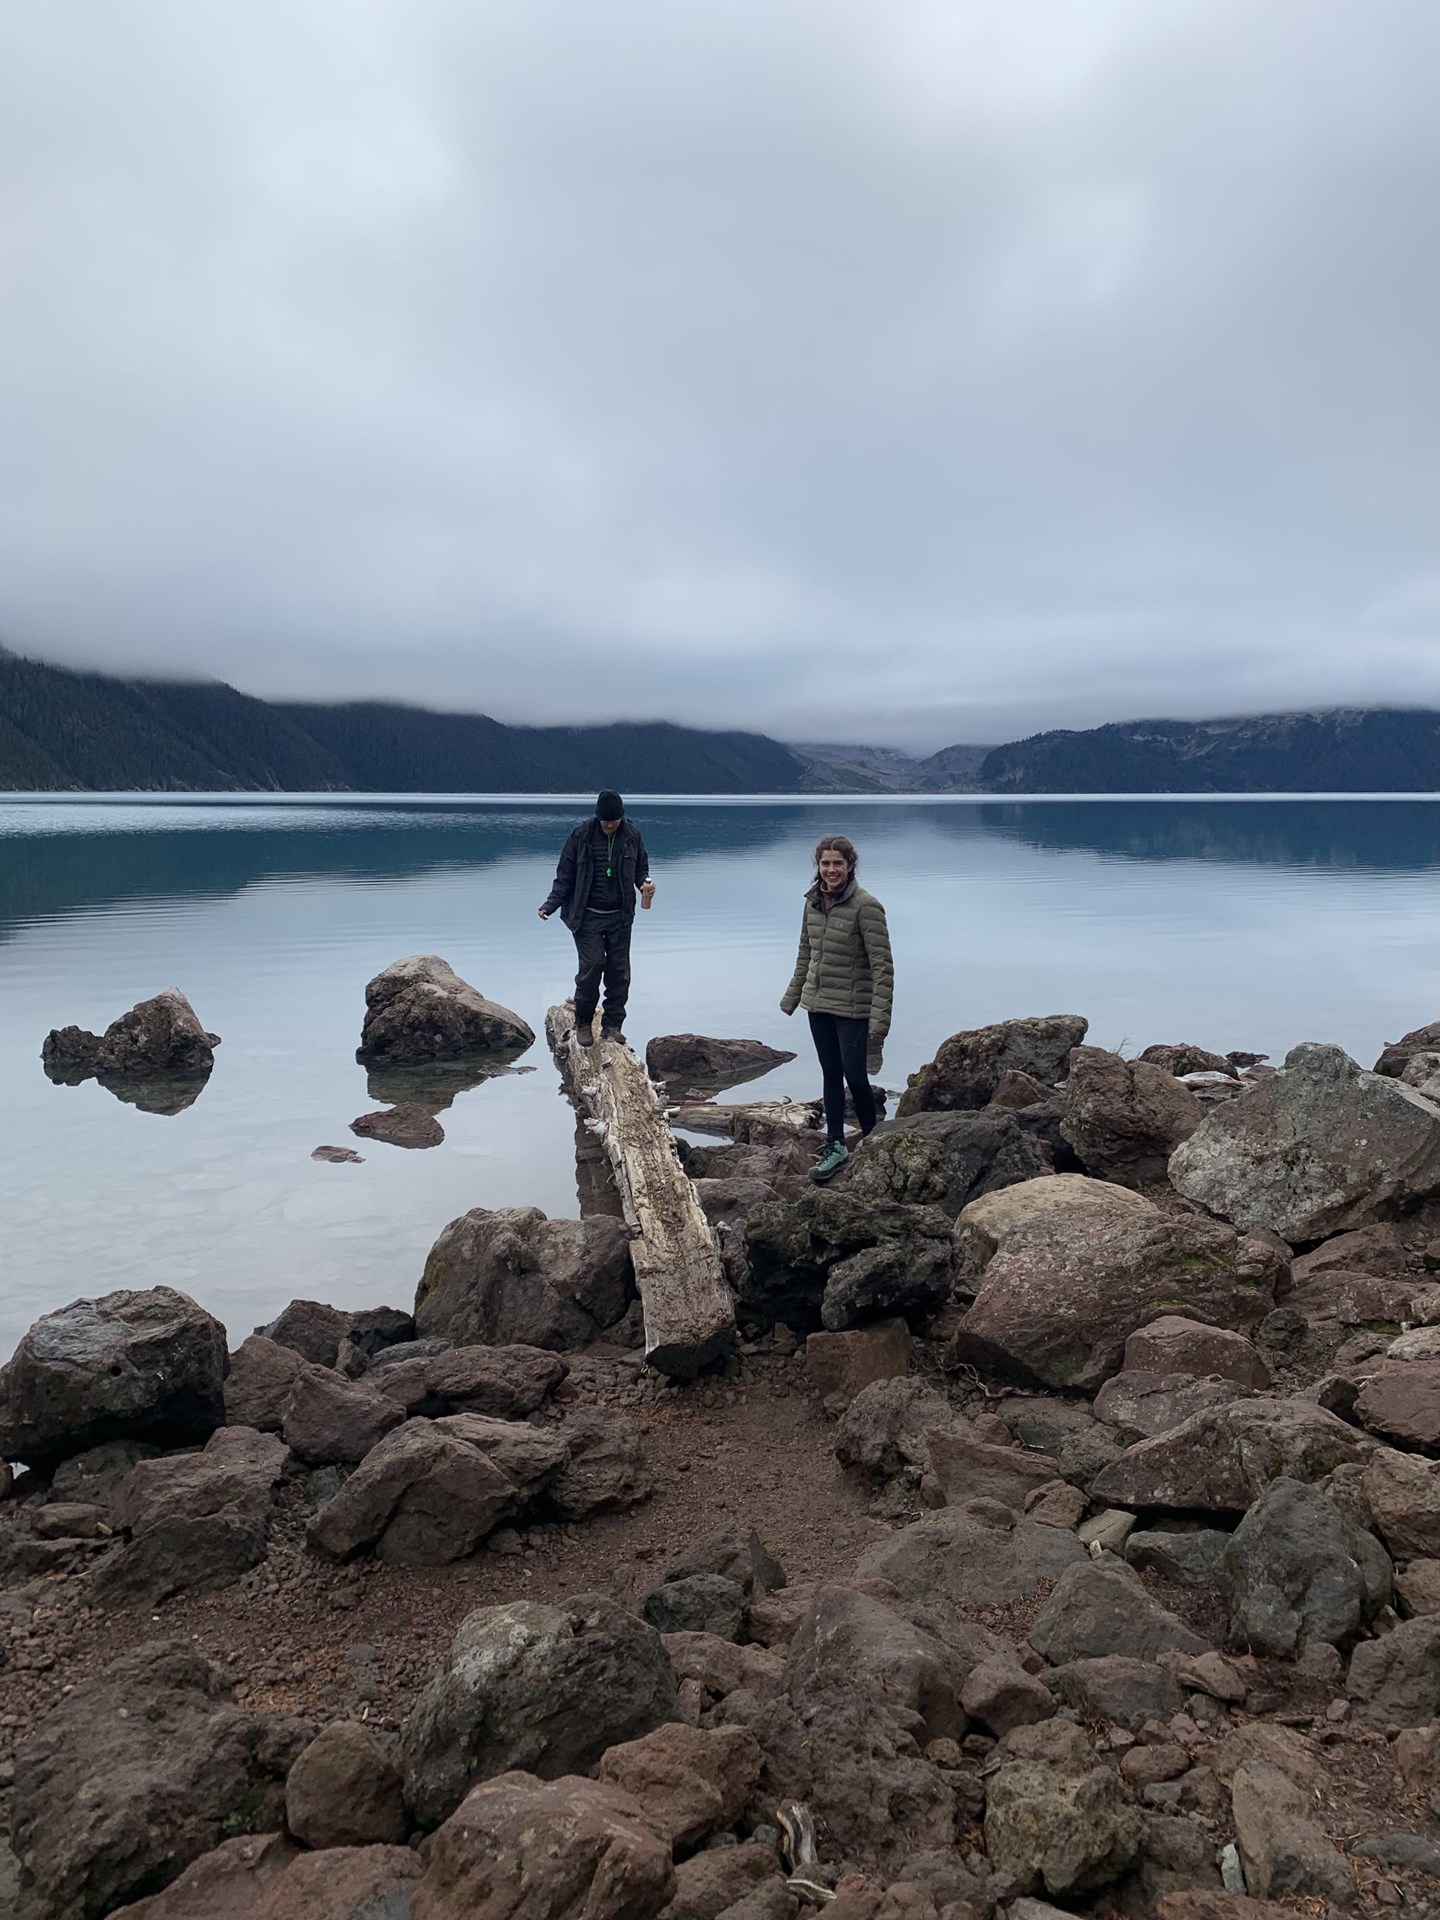 Two people stand on the shore of a still lake. The sky is overcast.